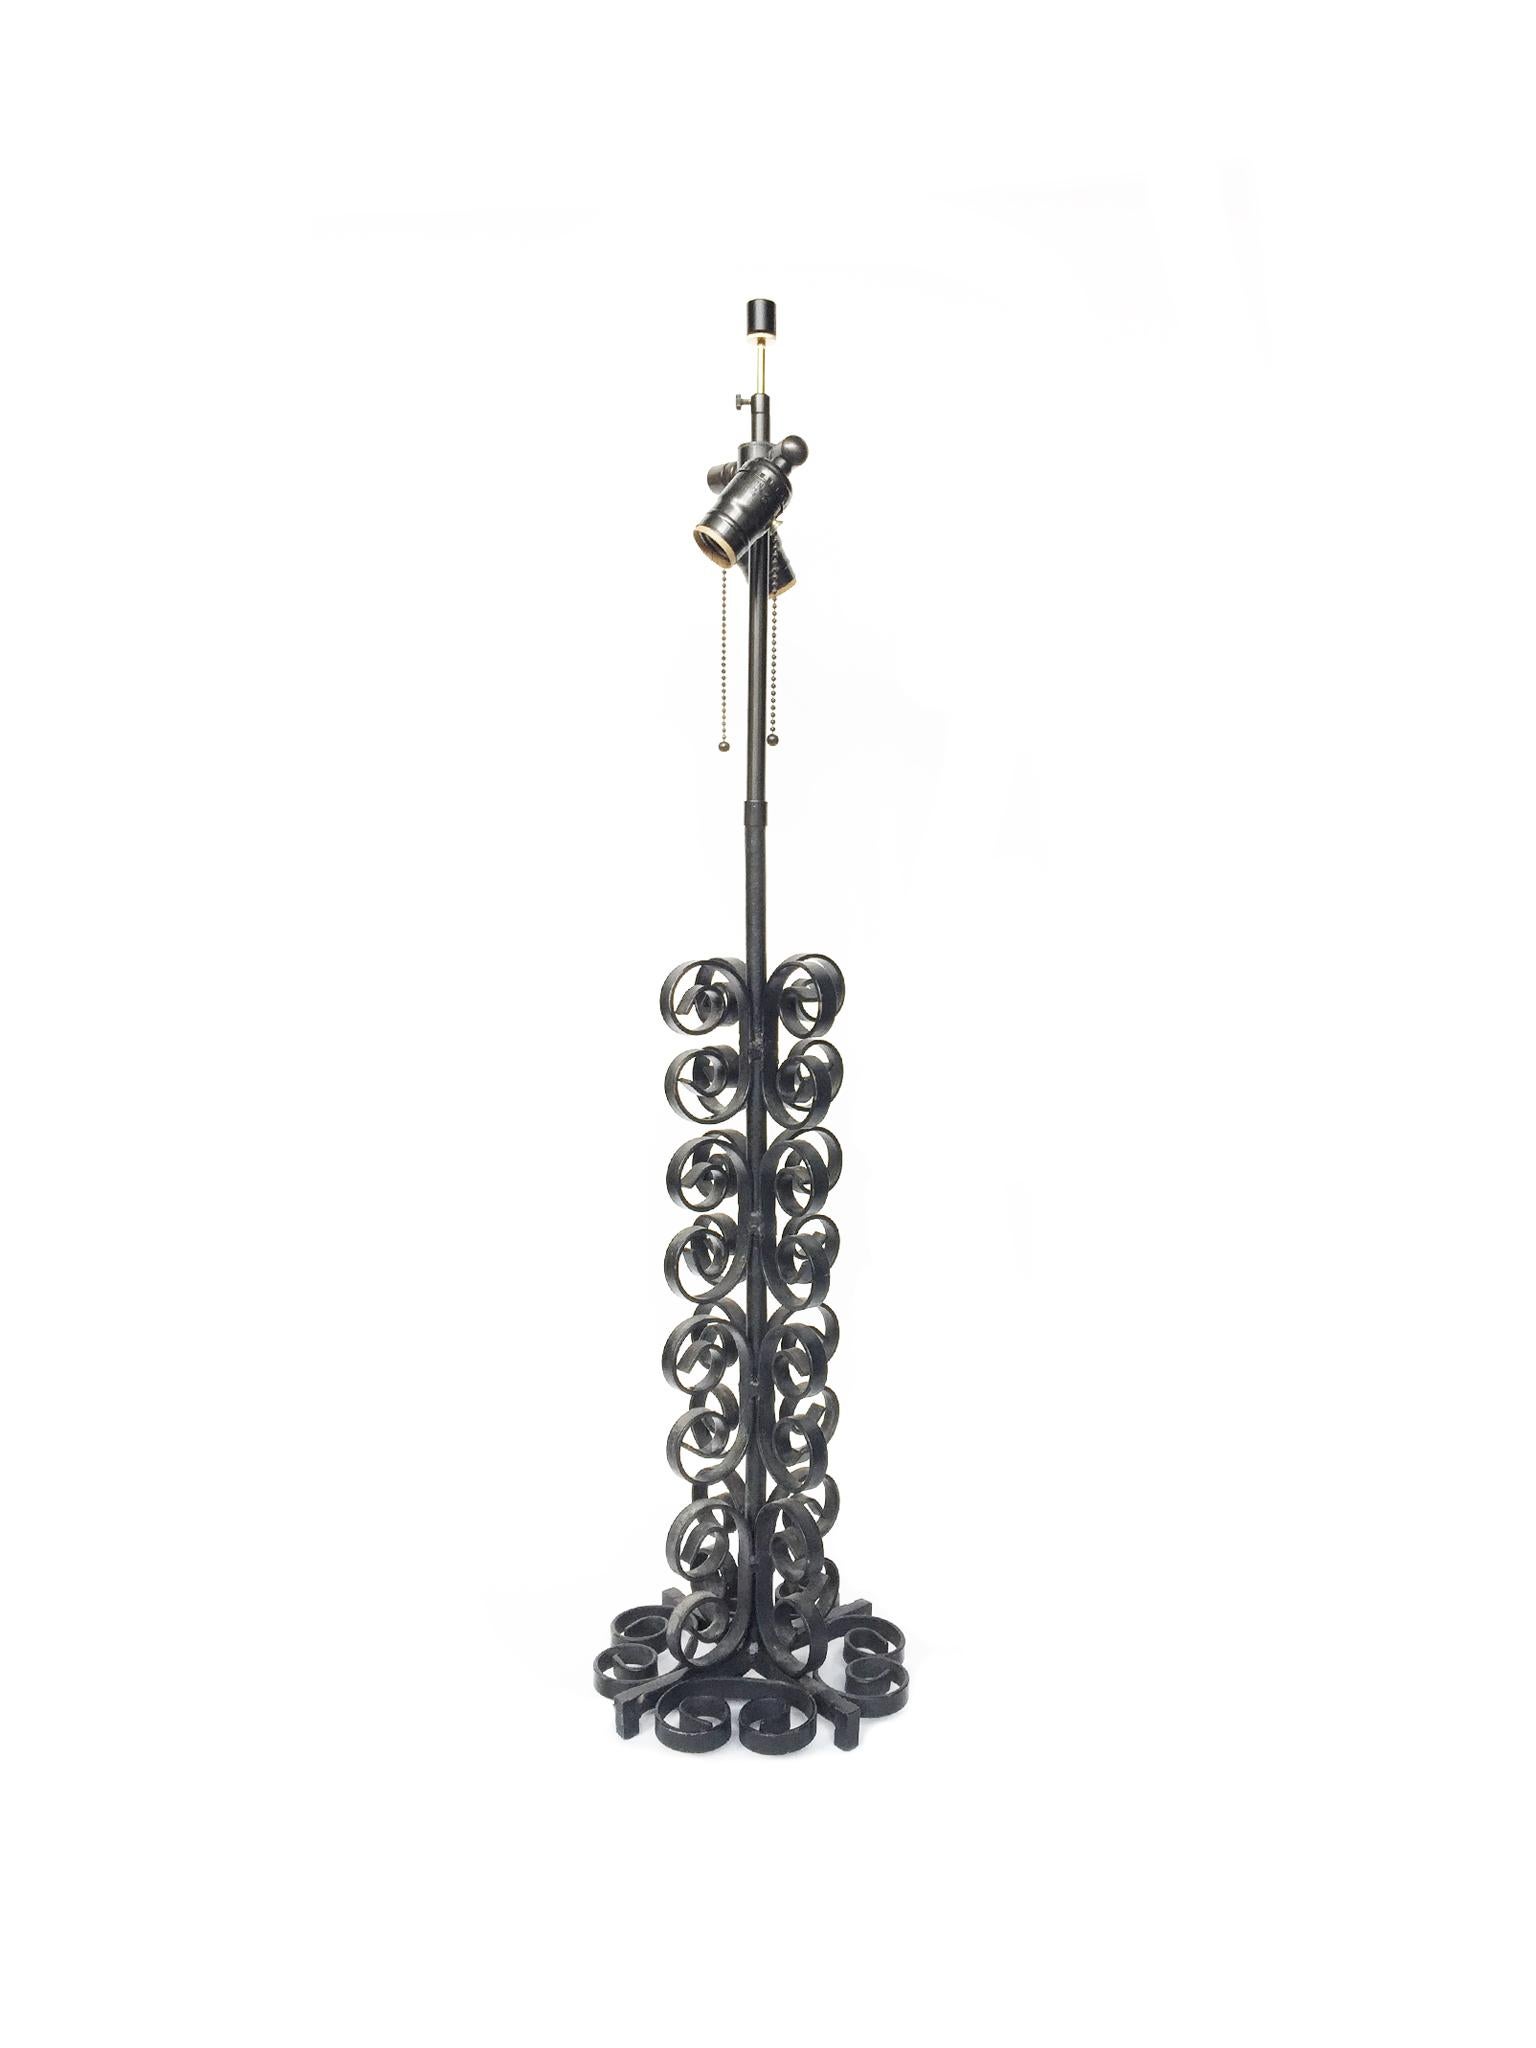 Art Deco Mid-20th Century Wrought Iron Table Lamp in the Style of Paul Kiss